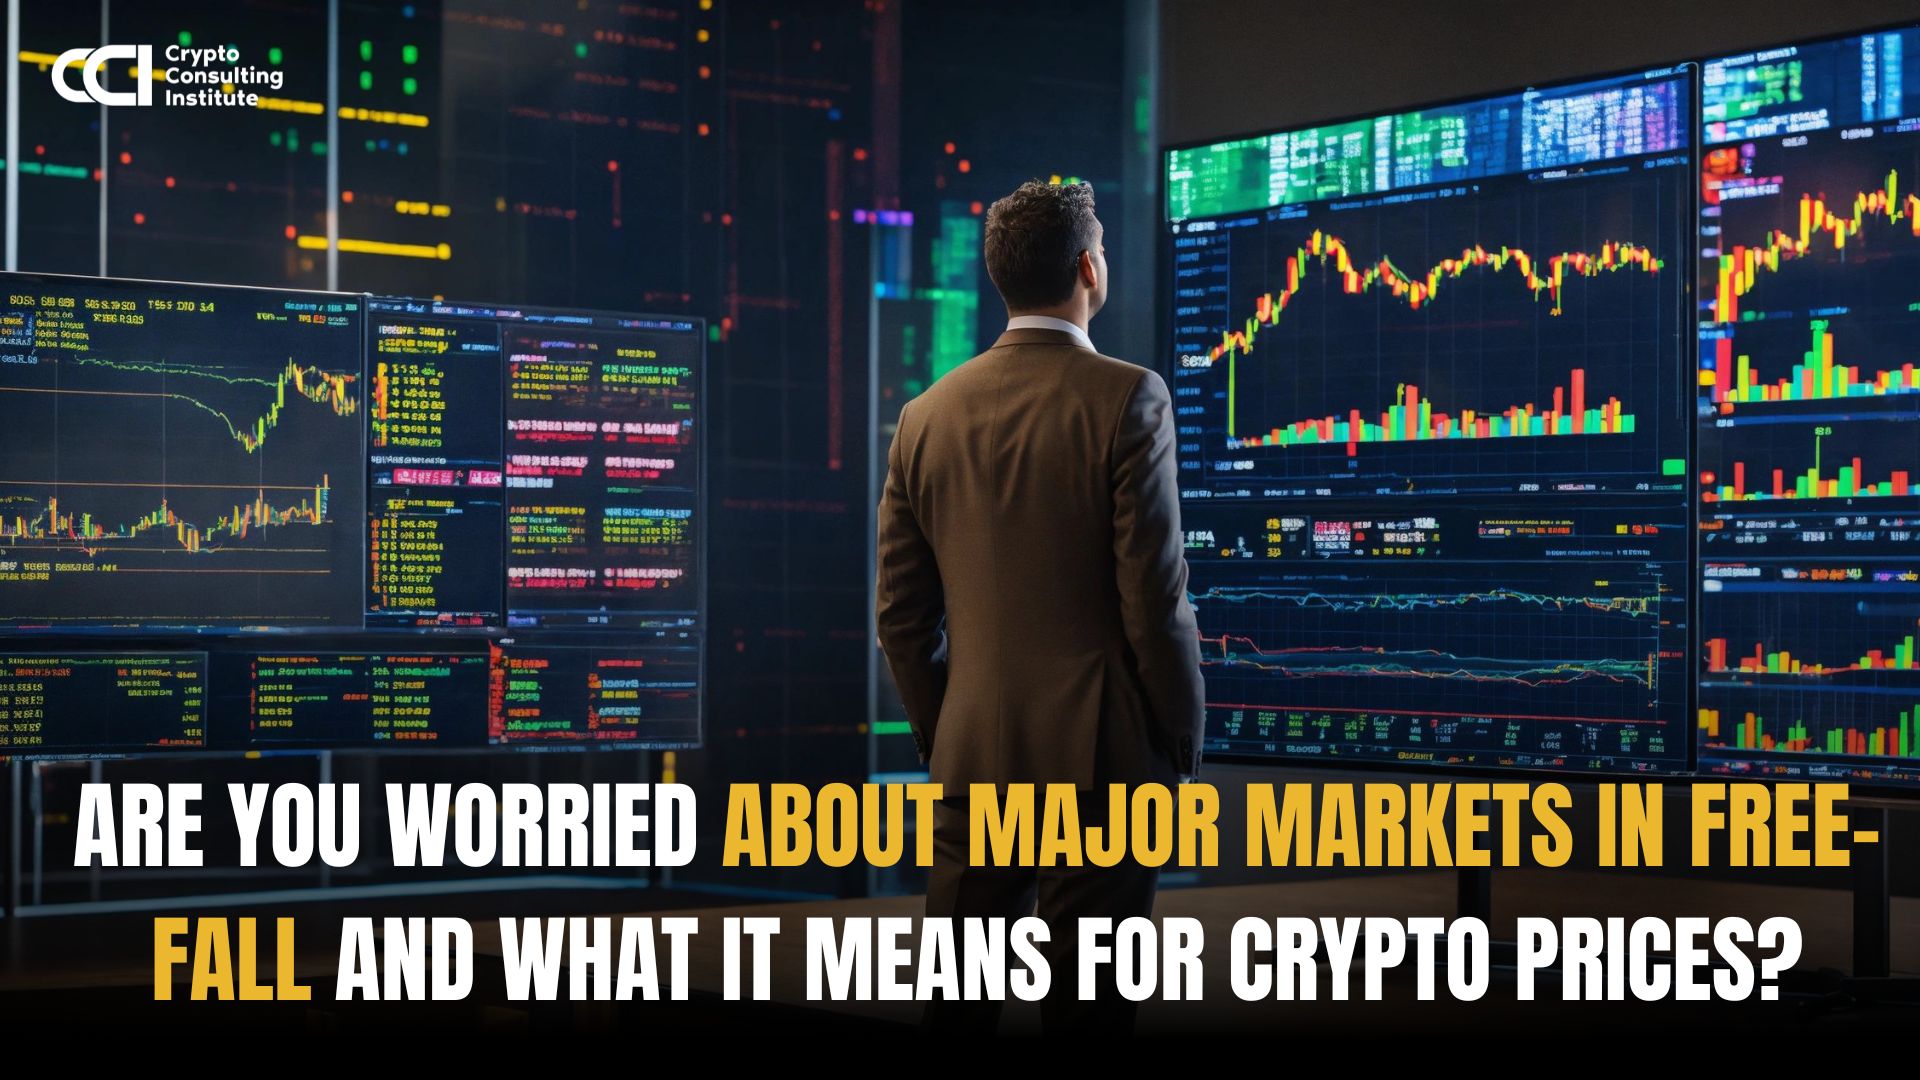 Are you worried about major markets in free-fall and what it means for crypto prices?